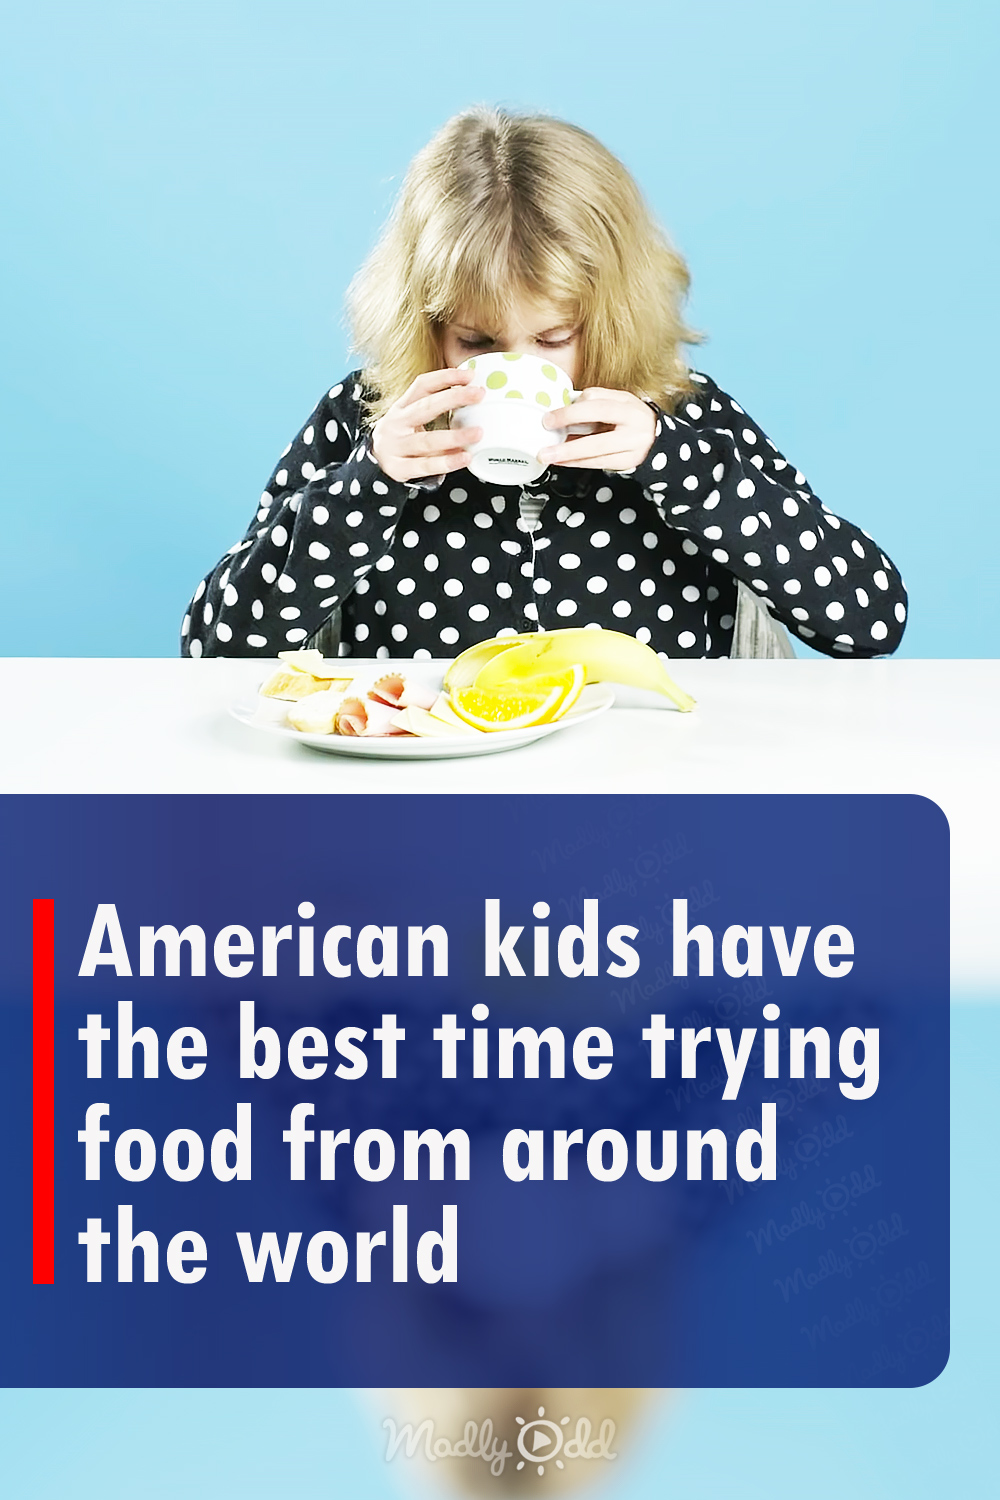 American kids have the best time trying food from around the world